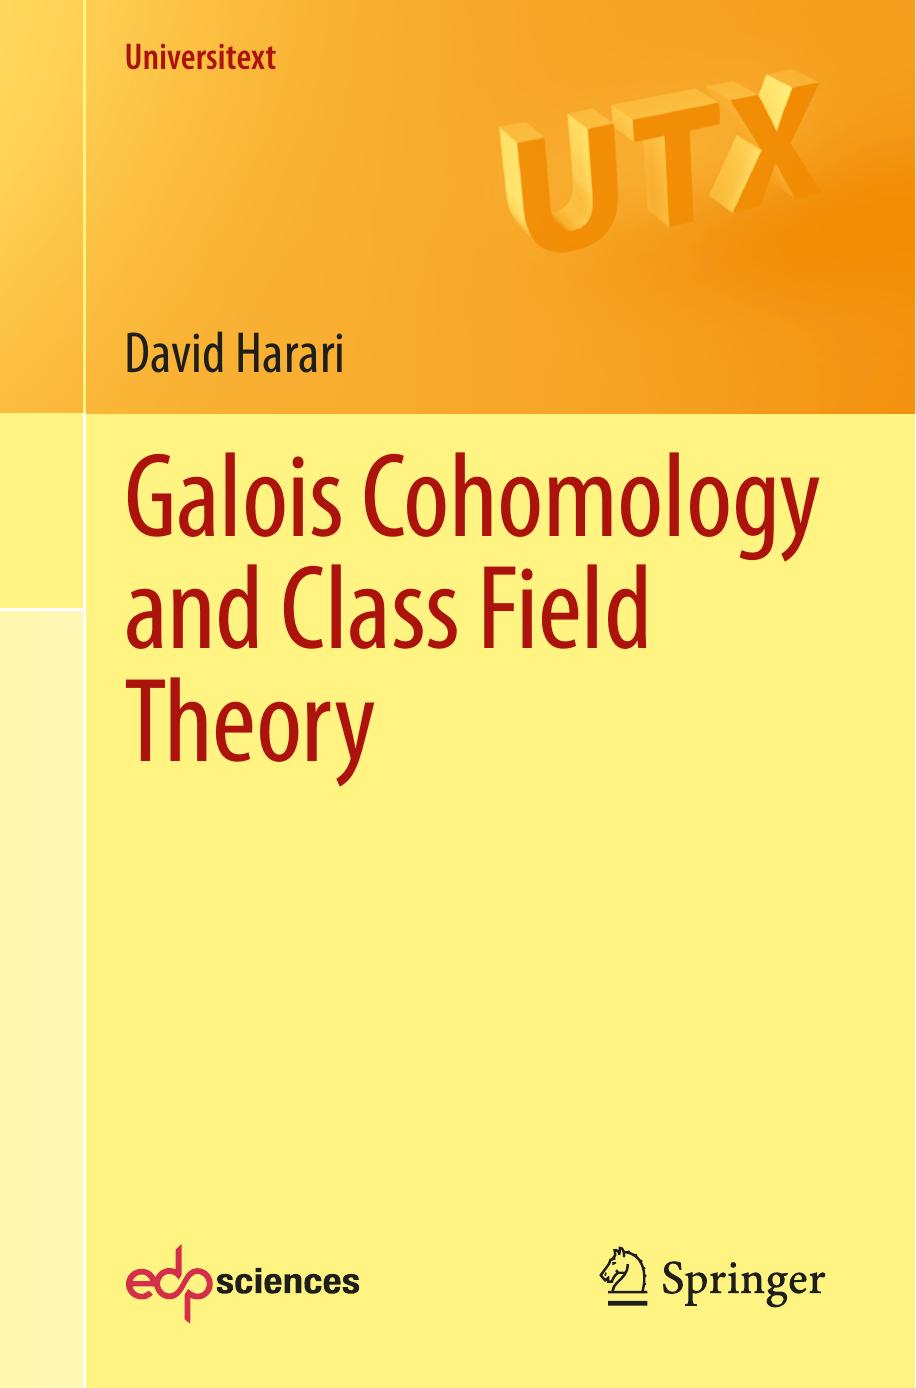 Galois Cohomology and Class Field Theory by David Harari